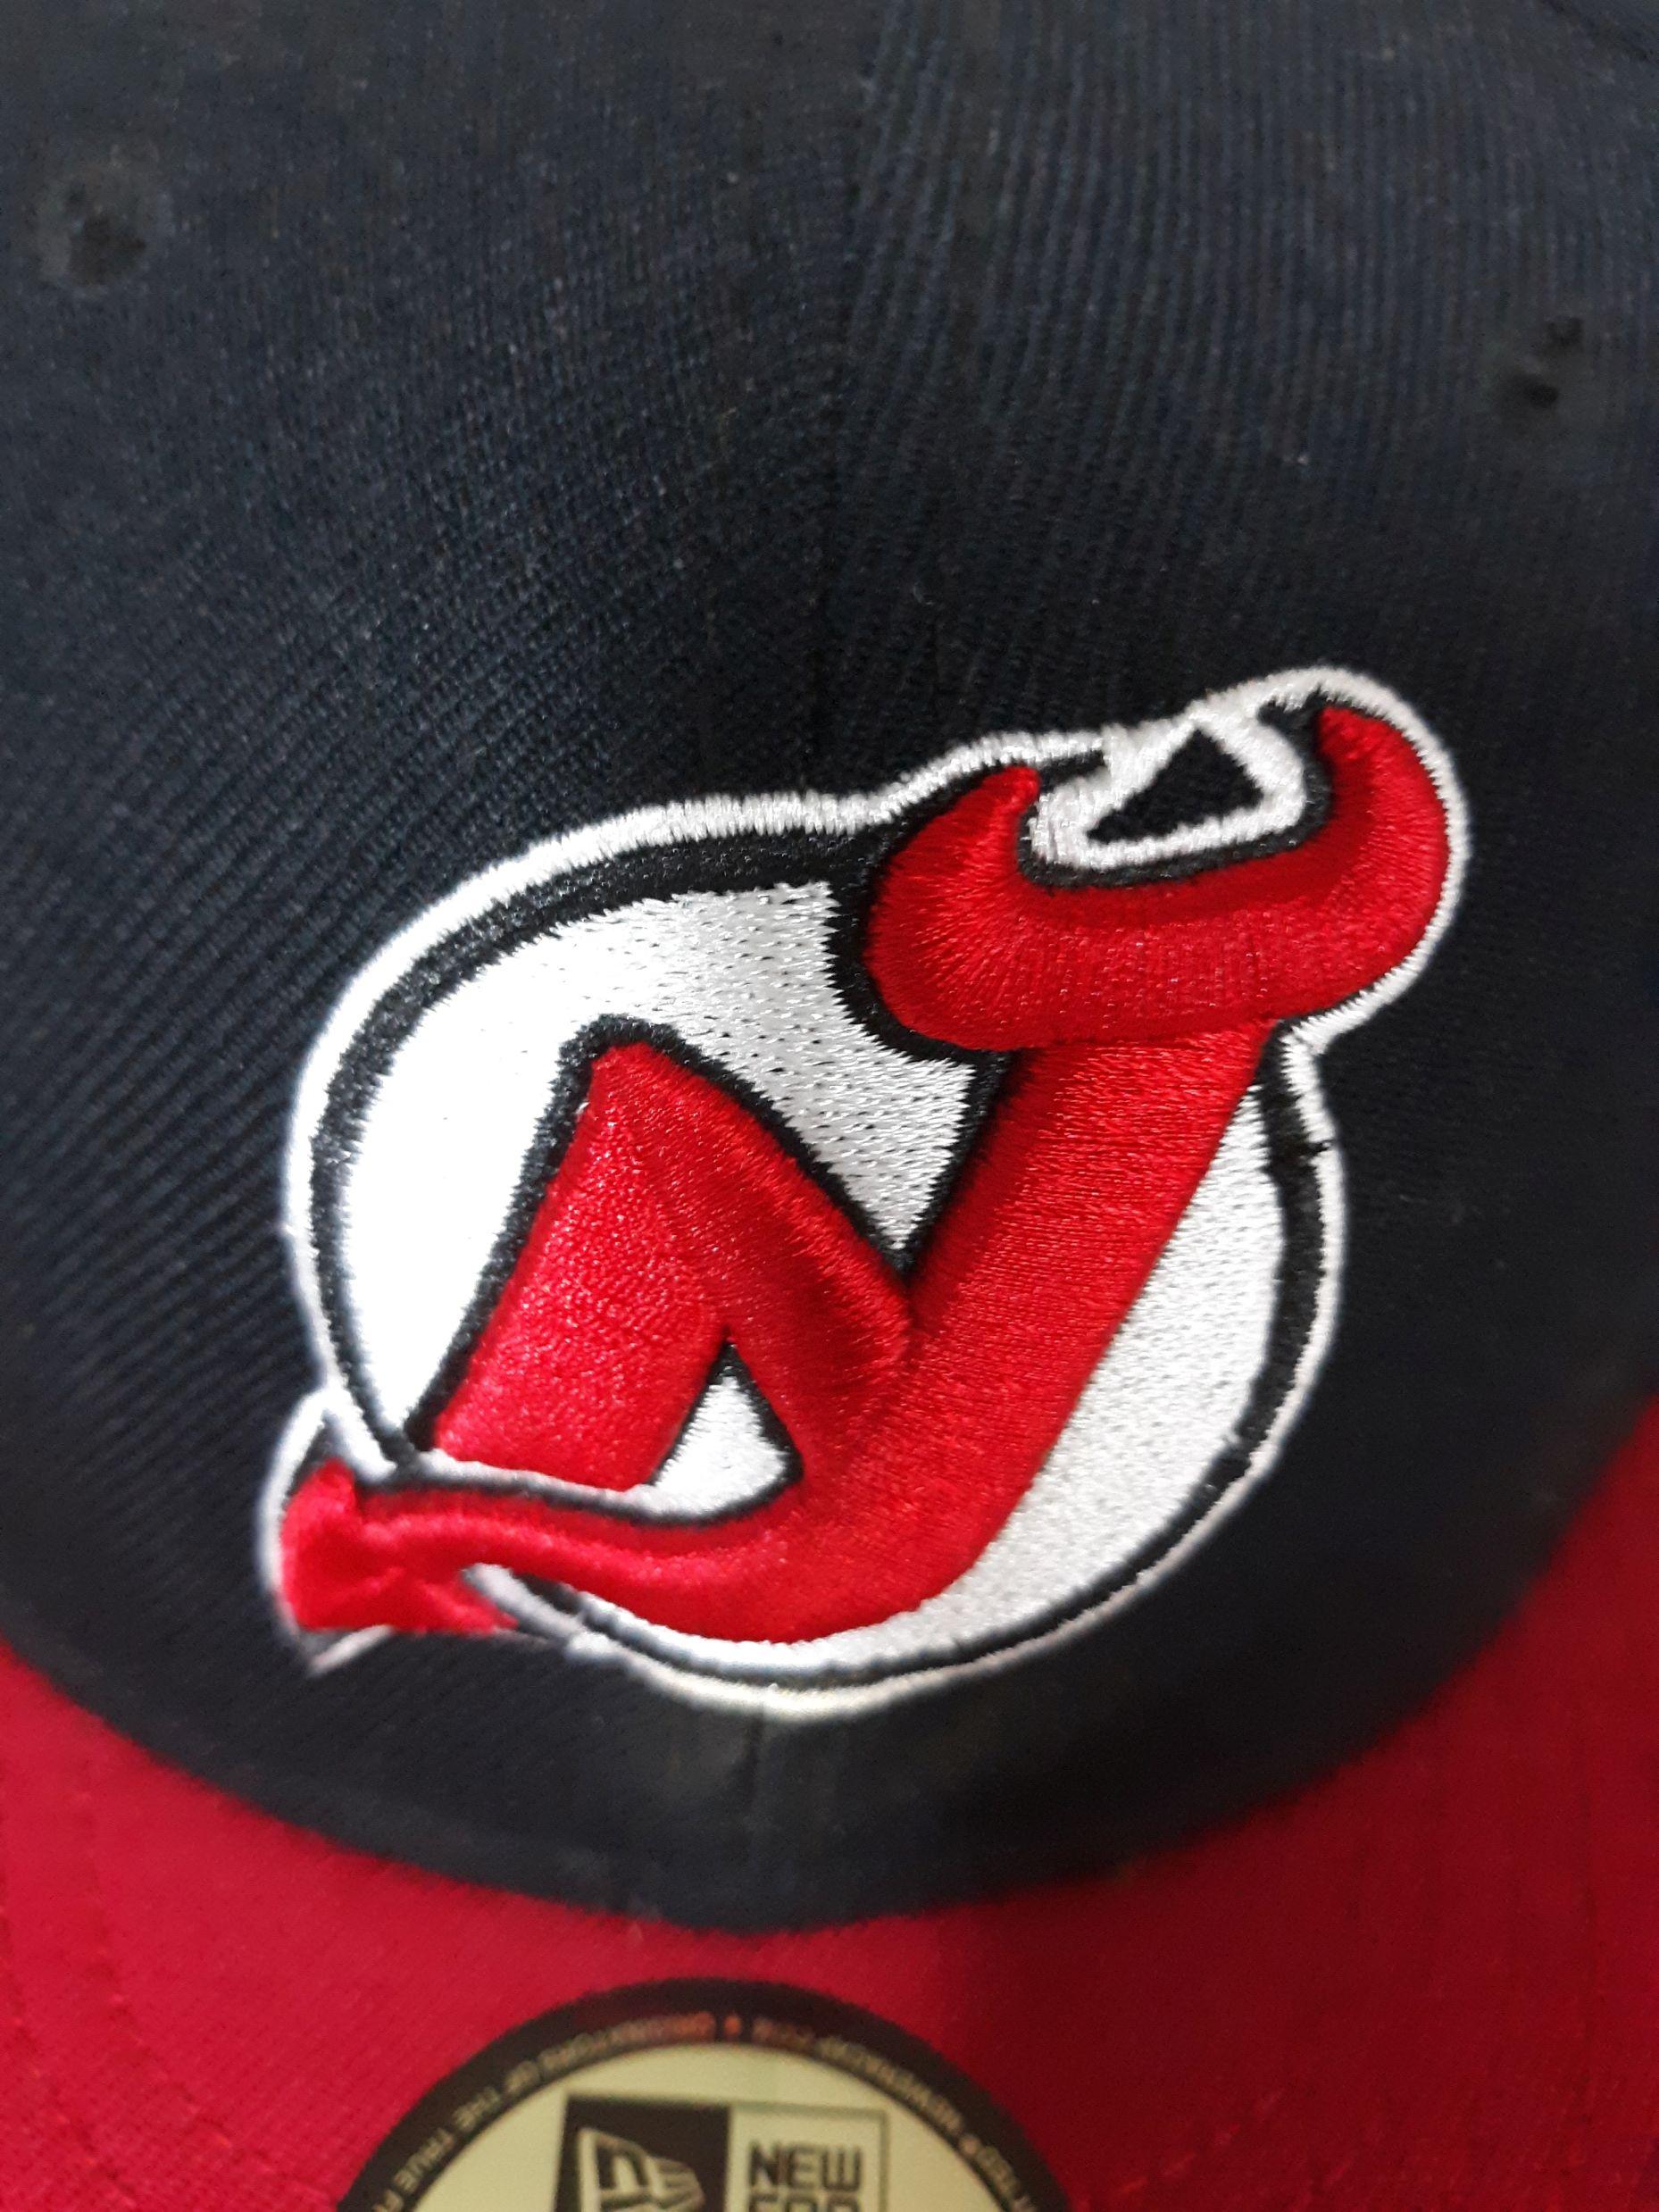 New Jersey Devils'47 Sure Shot Two=Tone Snapback Hat